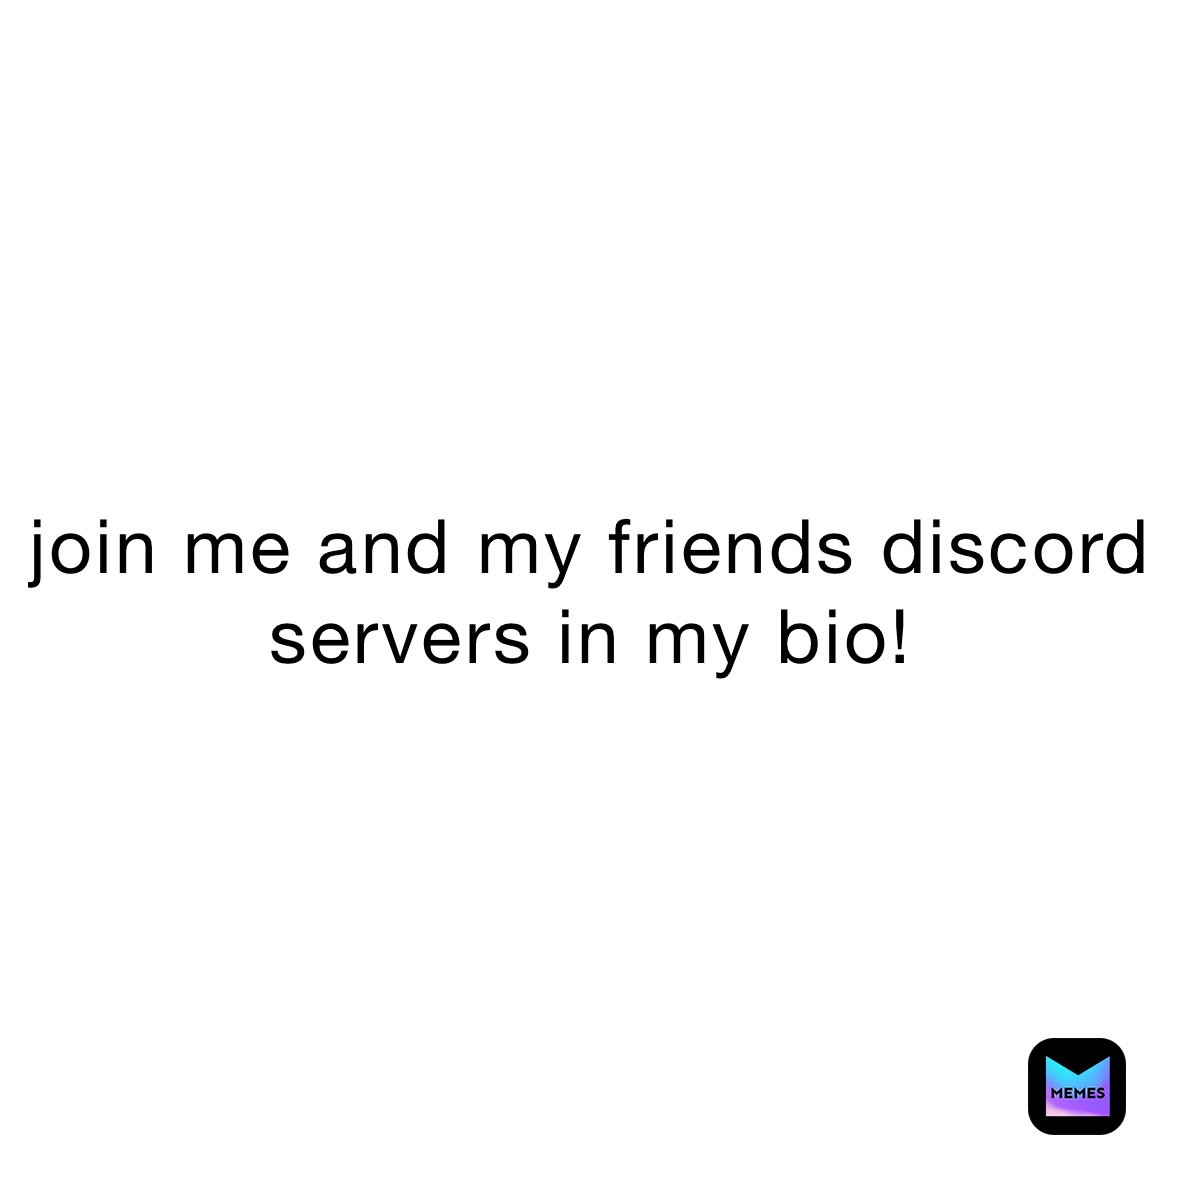 join me and my friends discord servers in my bio!